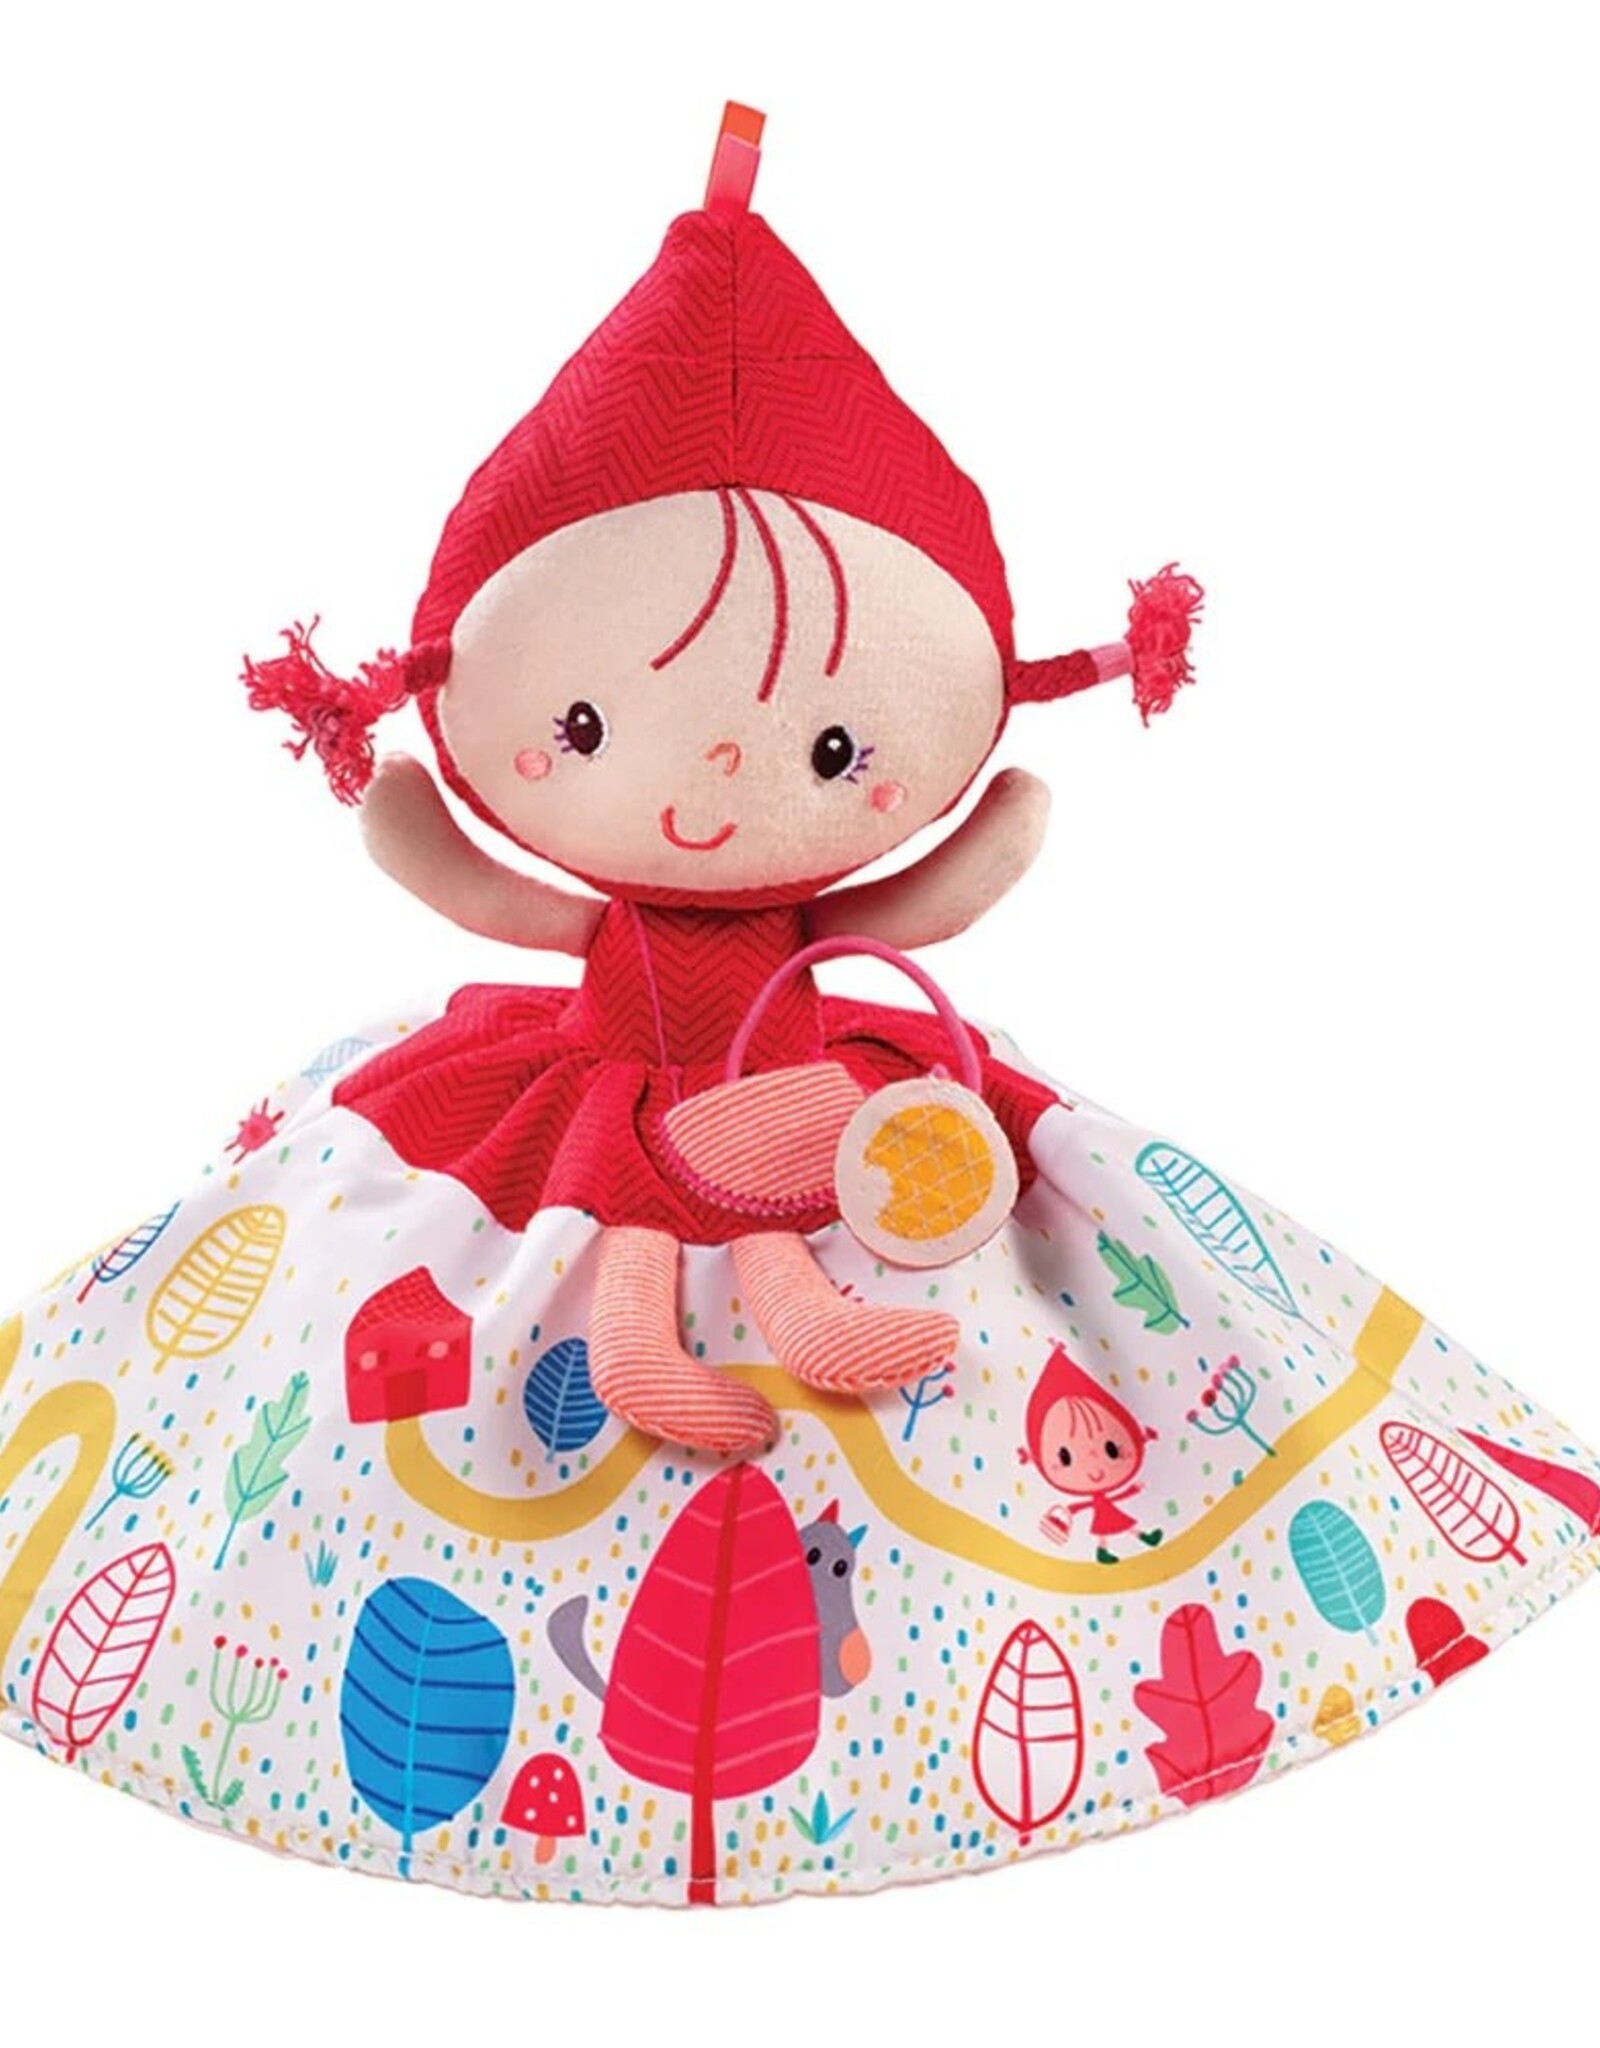 LITTLE RED RIDING HOOD - REVERSIBLE DOLL